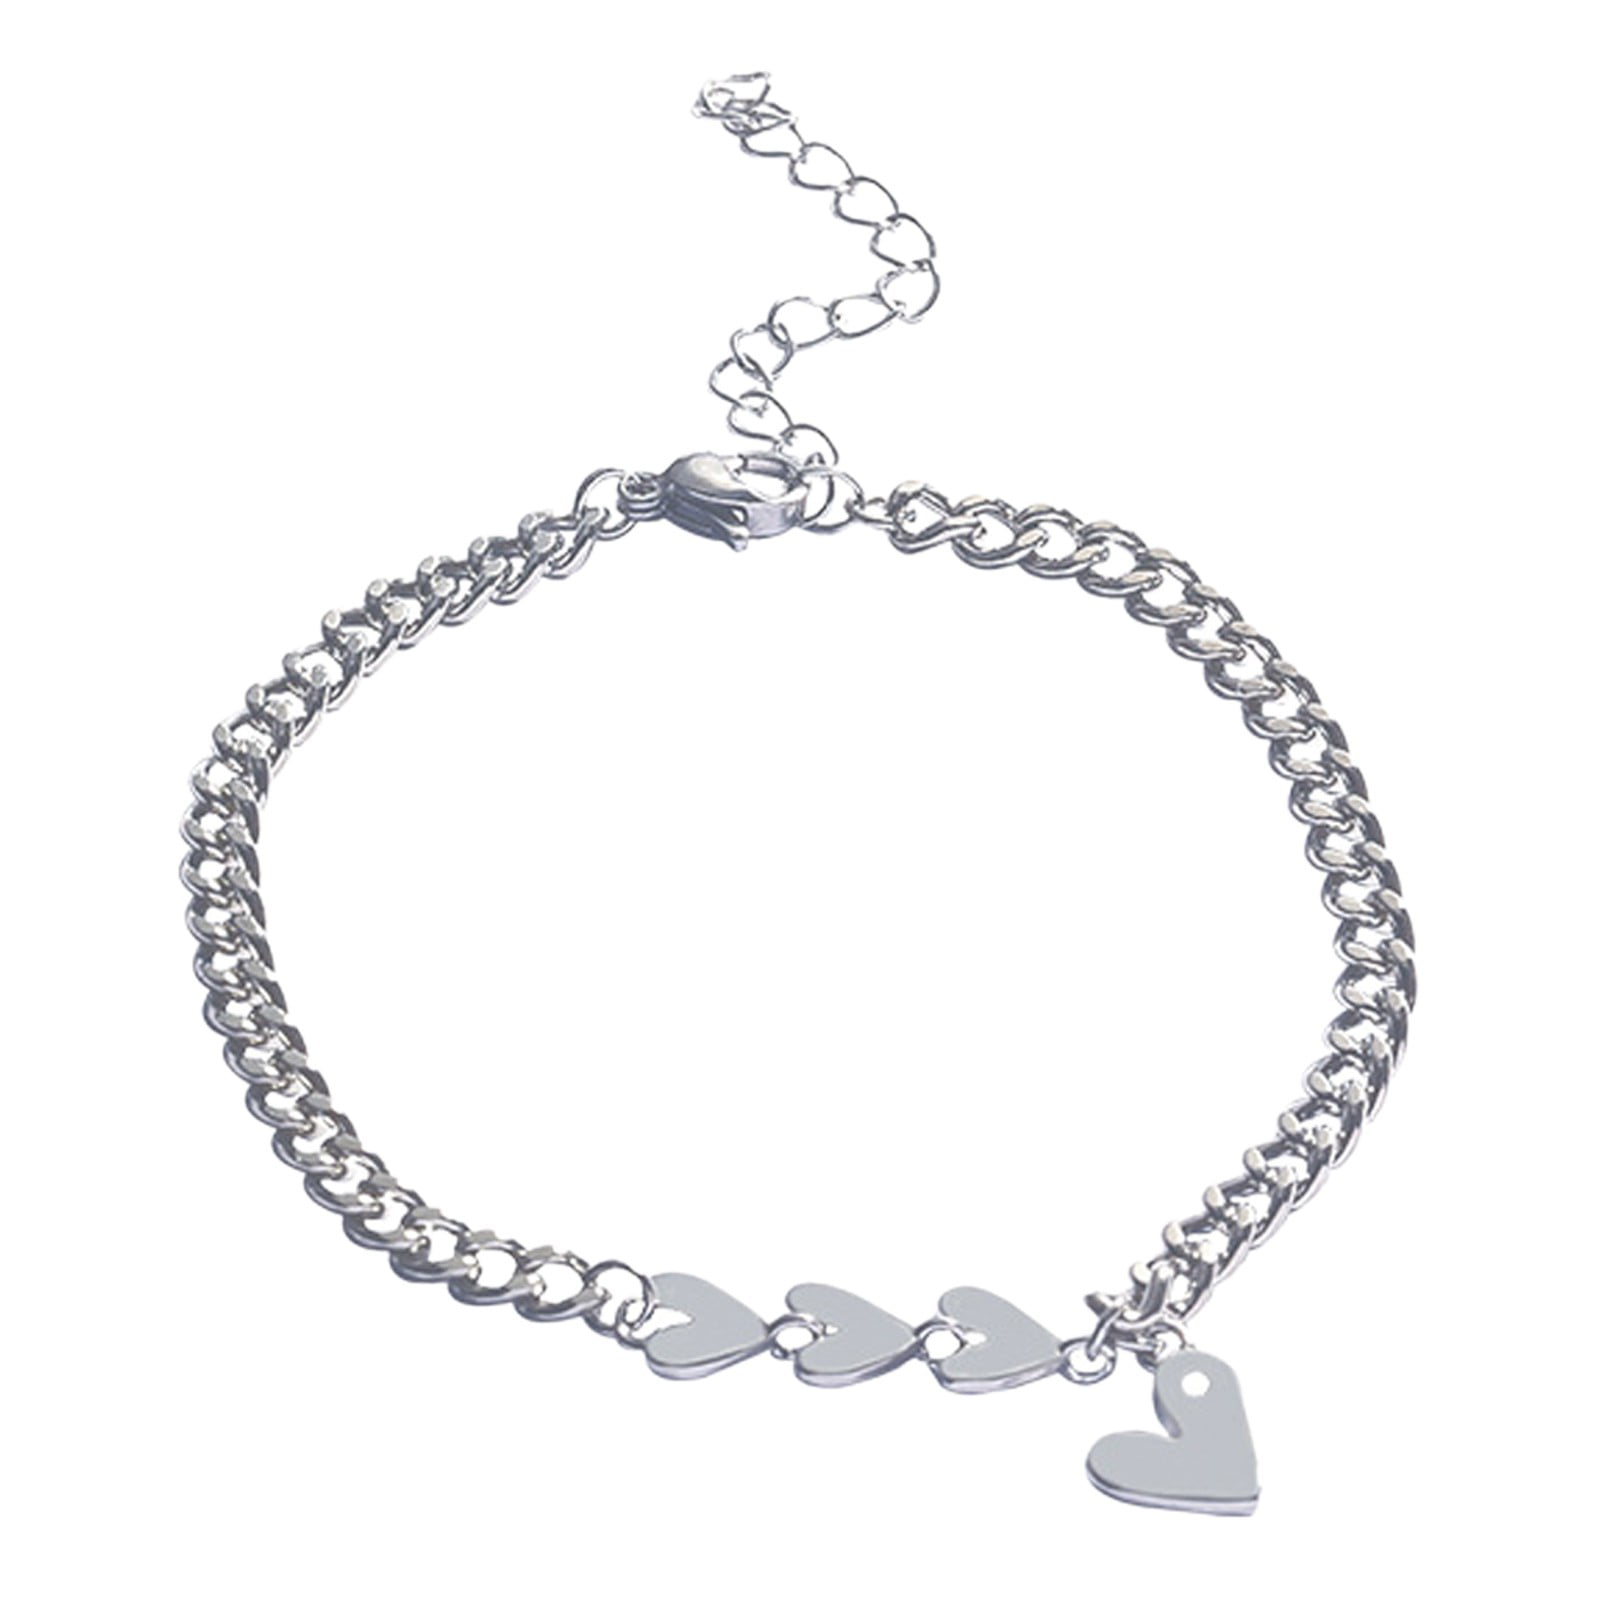 James Avery Sterling Silver Connected Hearts Charm Bracelet - M